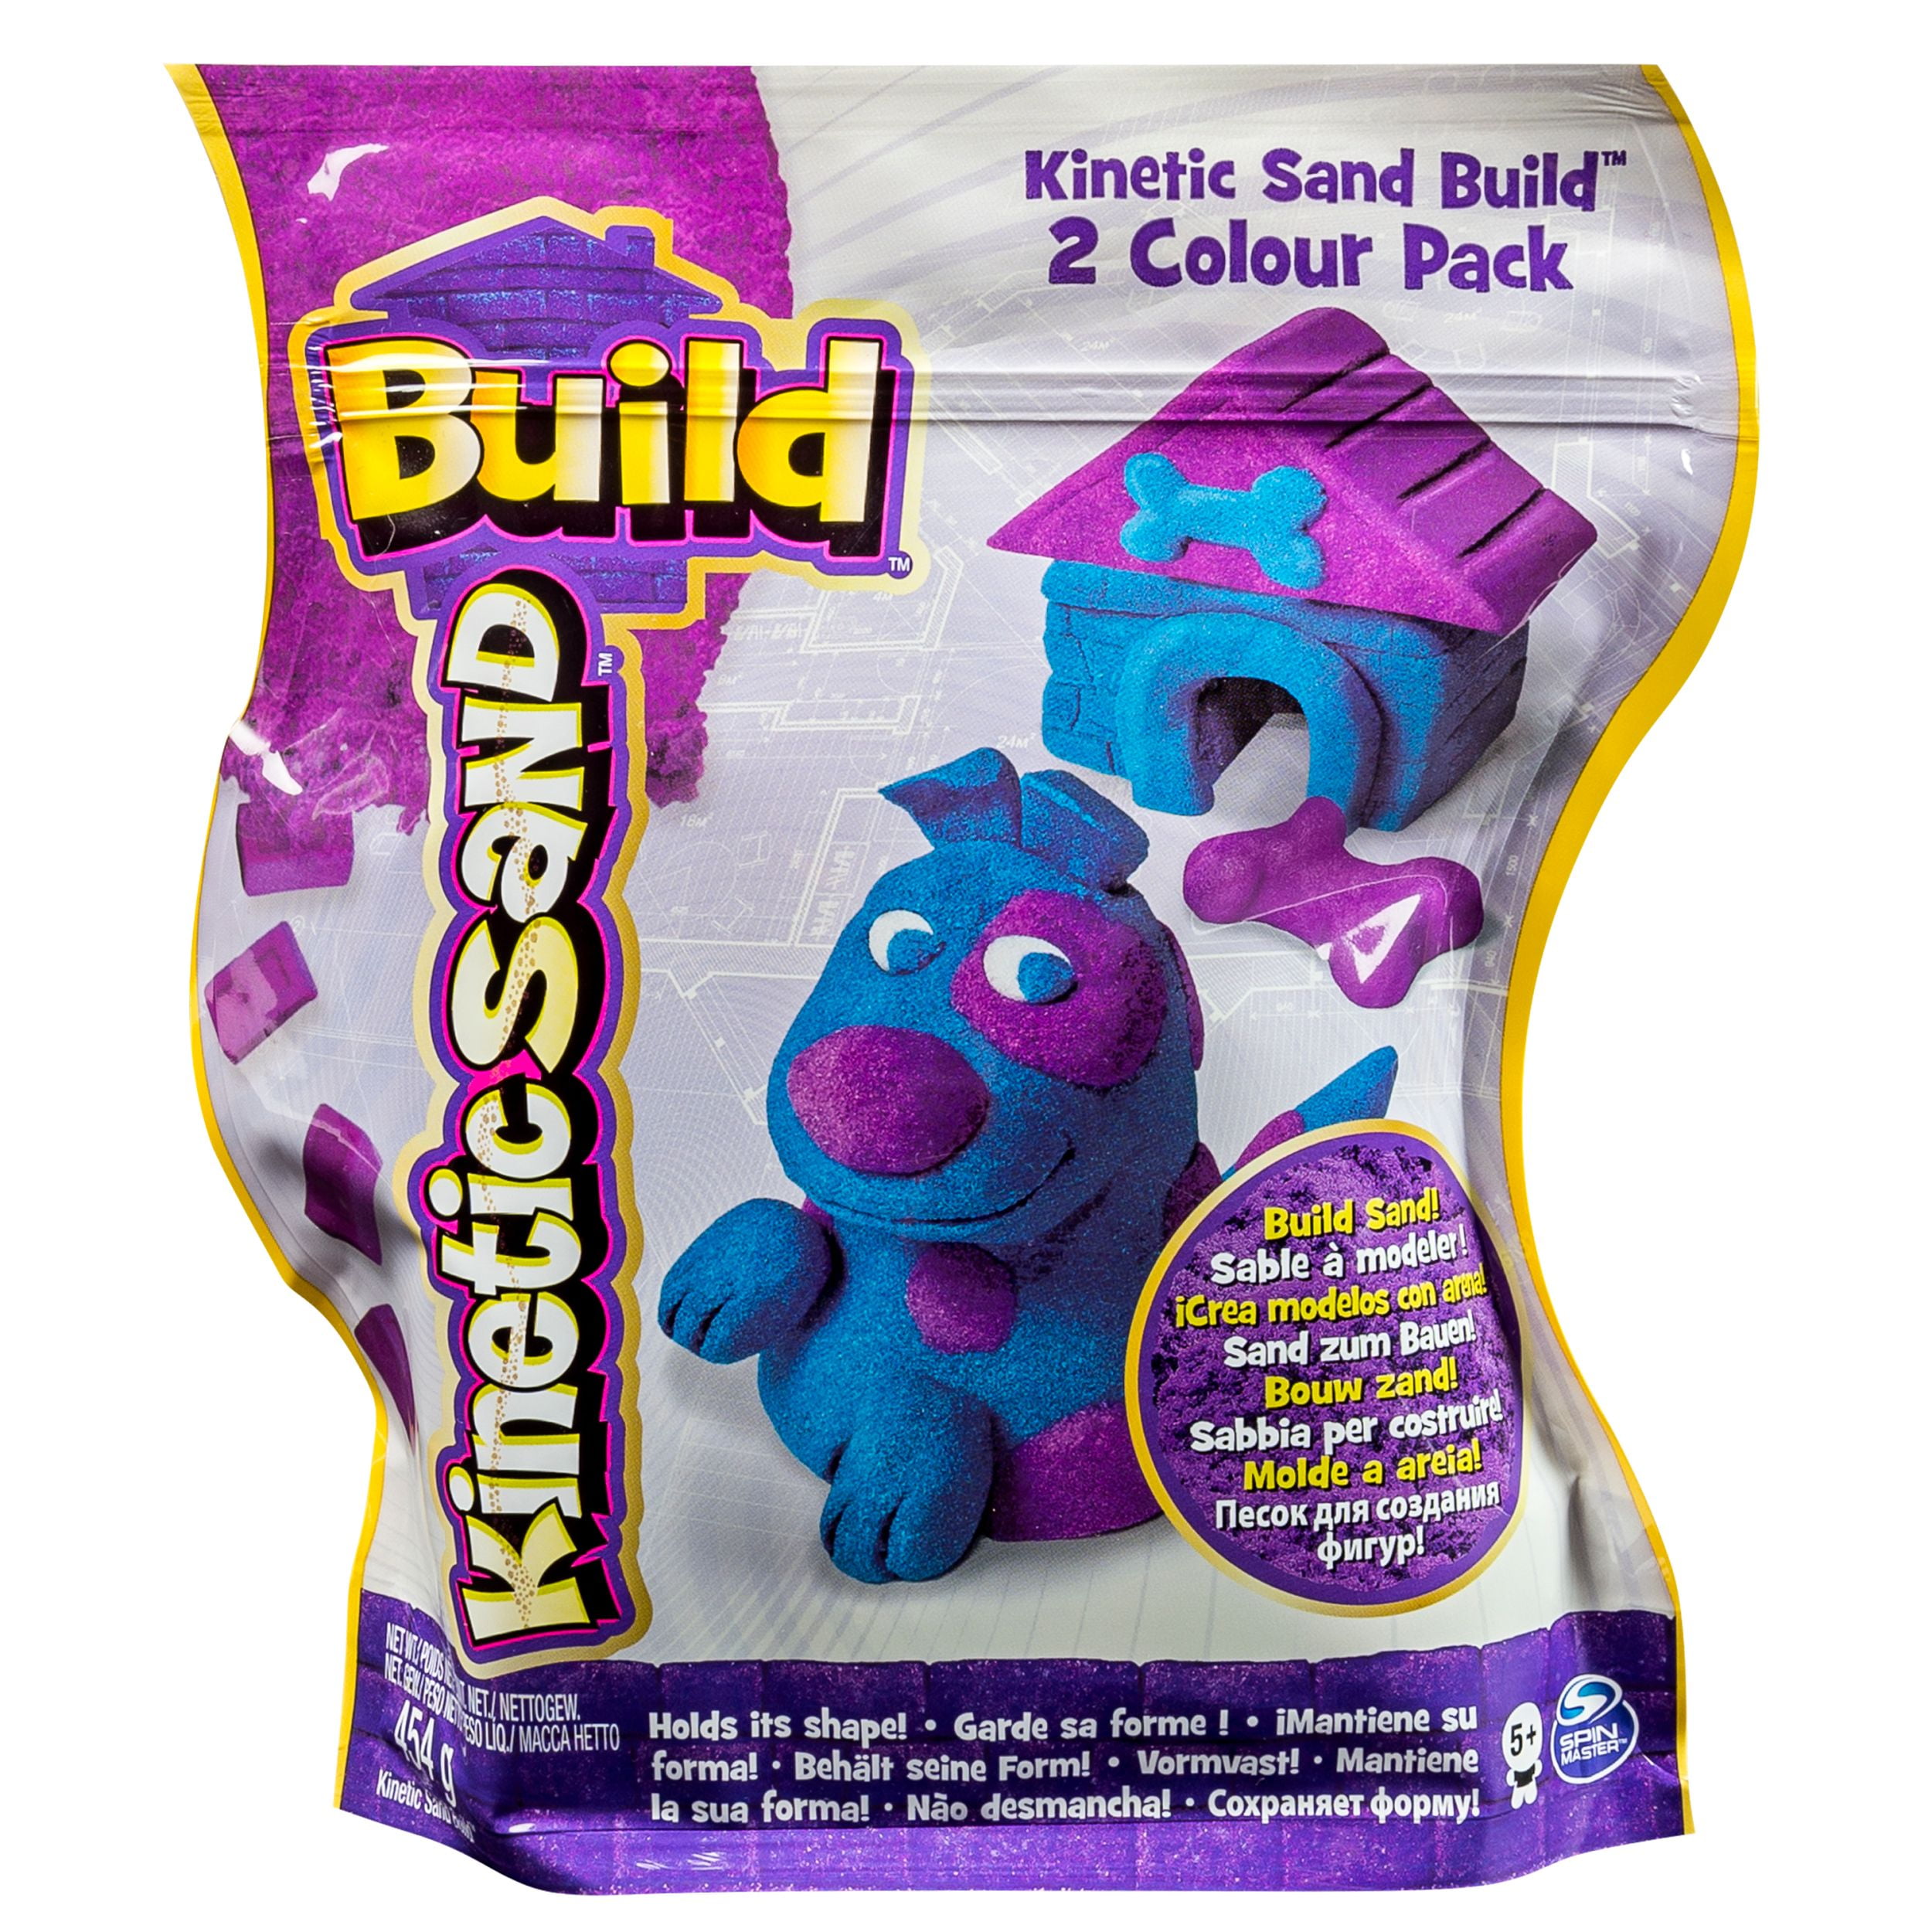 New kinetic sand construction green blue pink white or purple 2 colour packs 